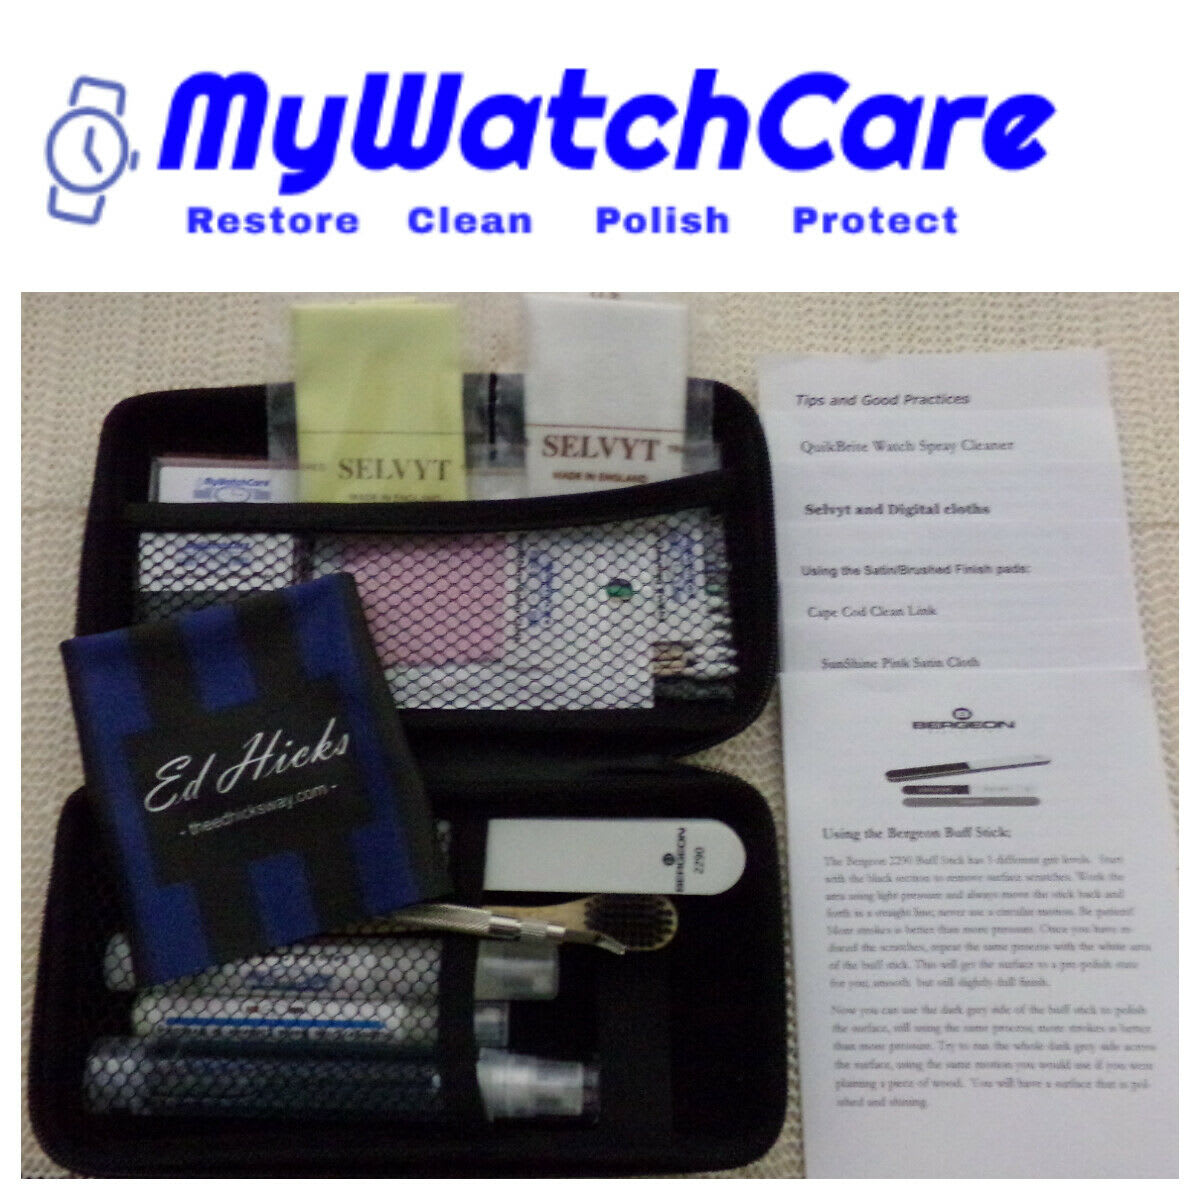 Watches Jewelry Rings Protective Cleaner Coating Kit Protect Against  Scratches